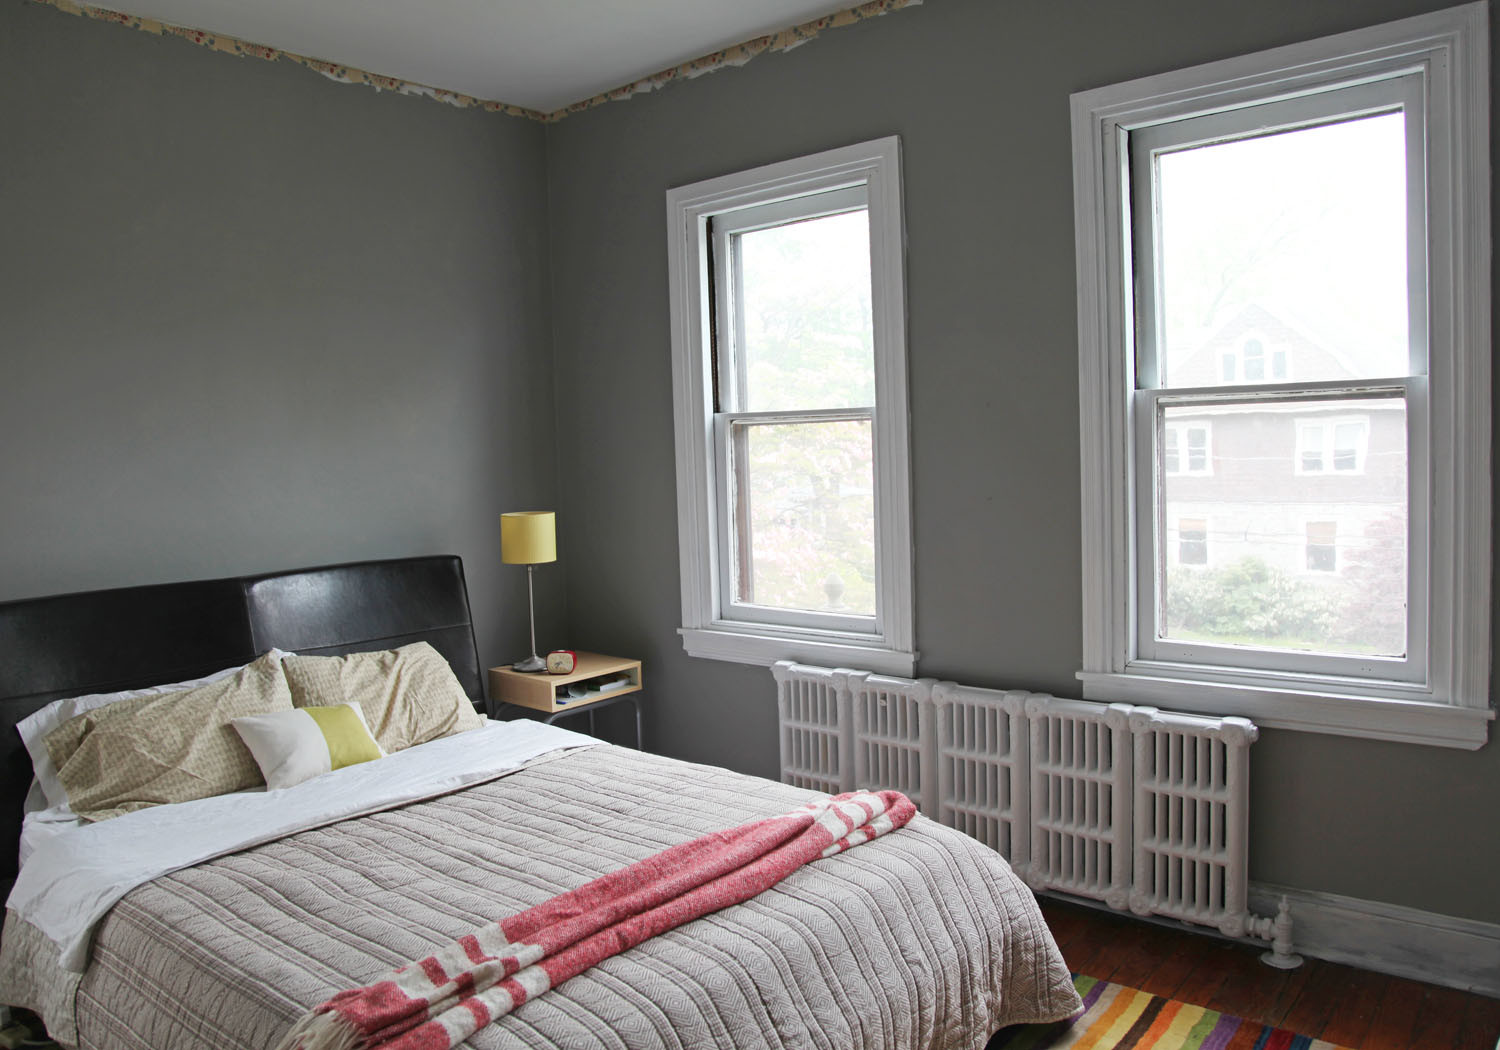 Master Bedroom Wall Colors
 Master Bedroom New Gray Wall Color & White Trim